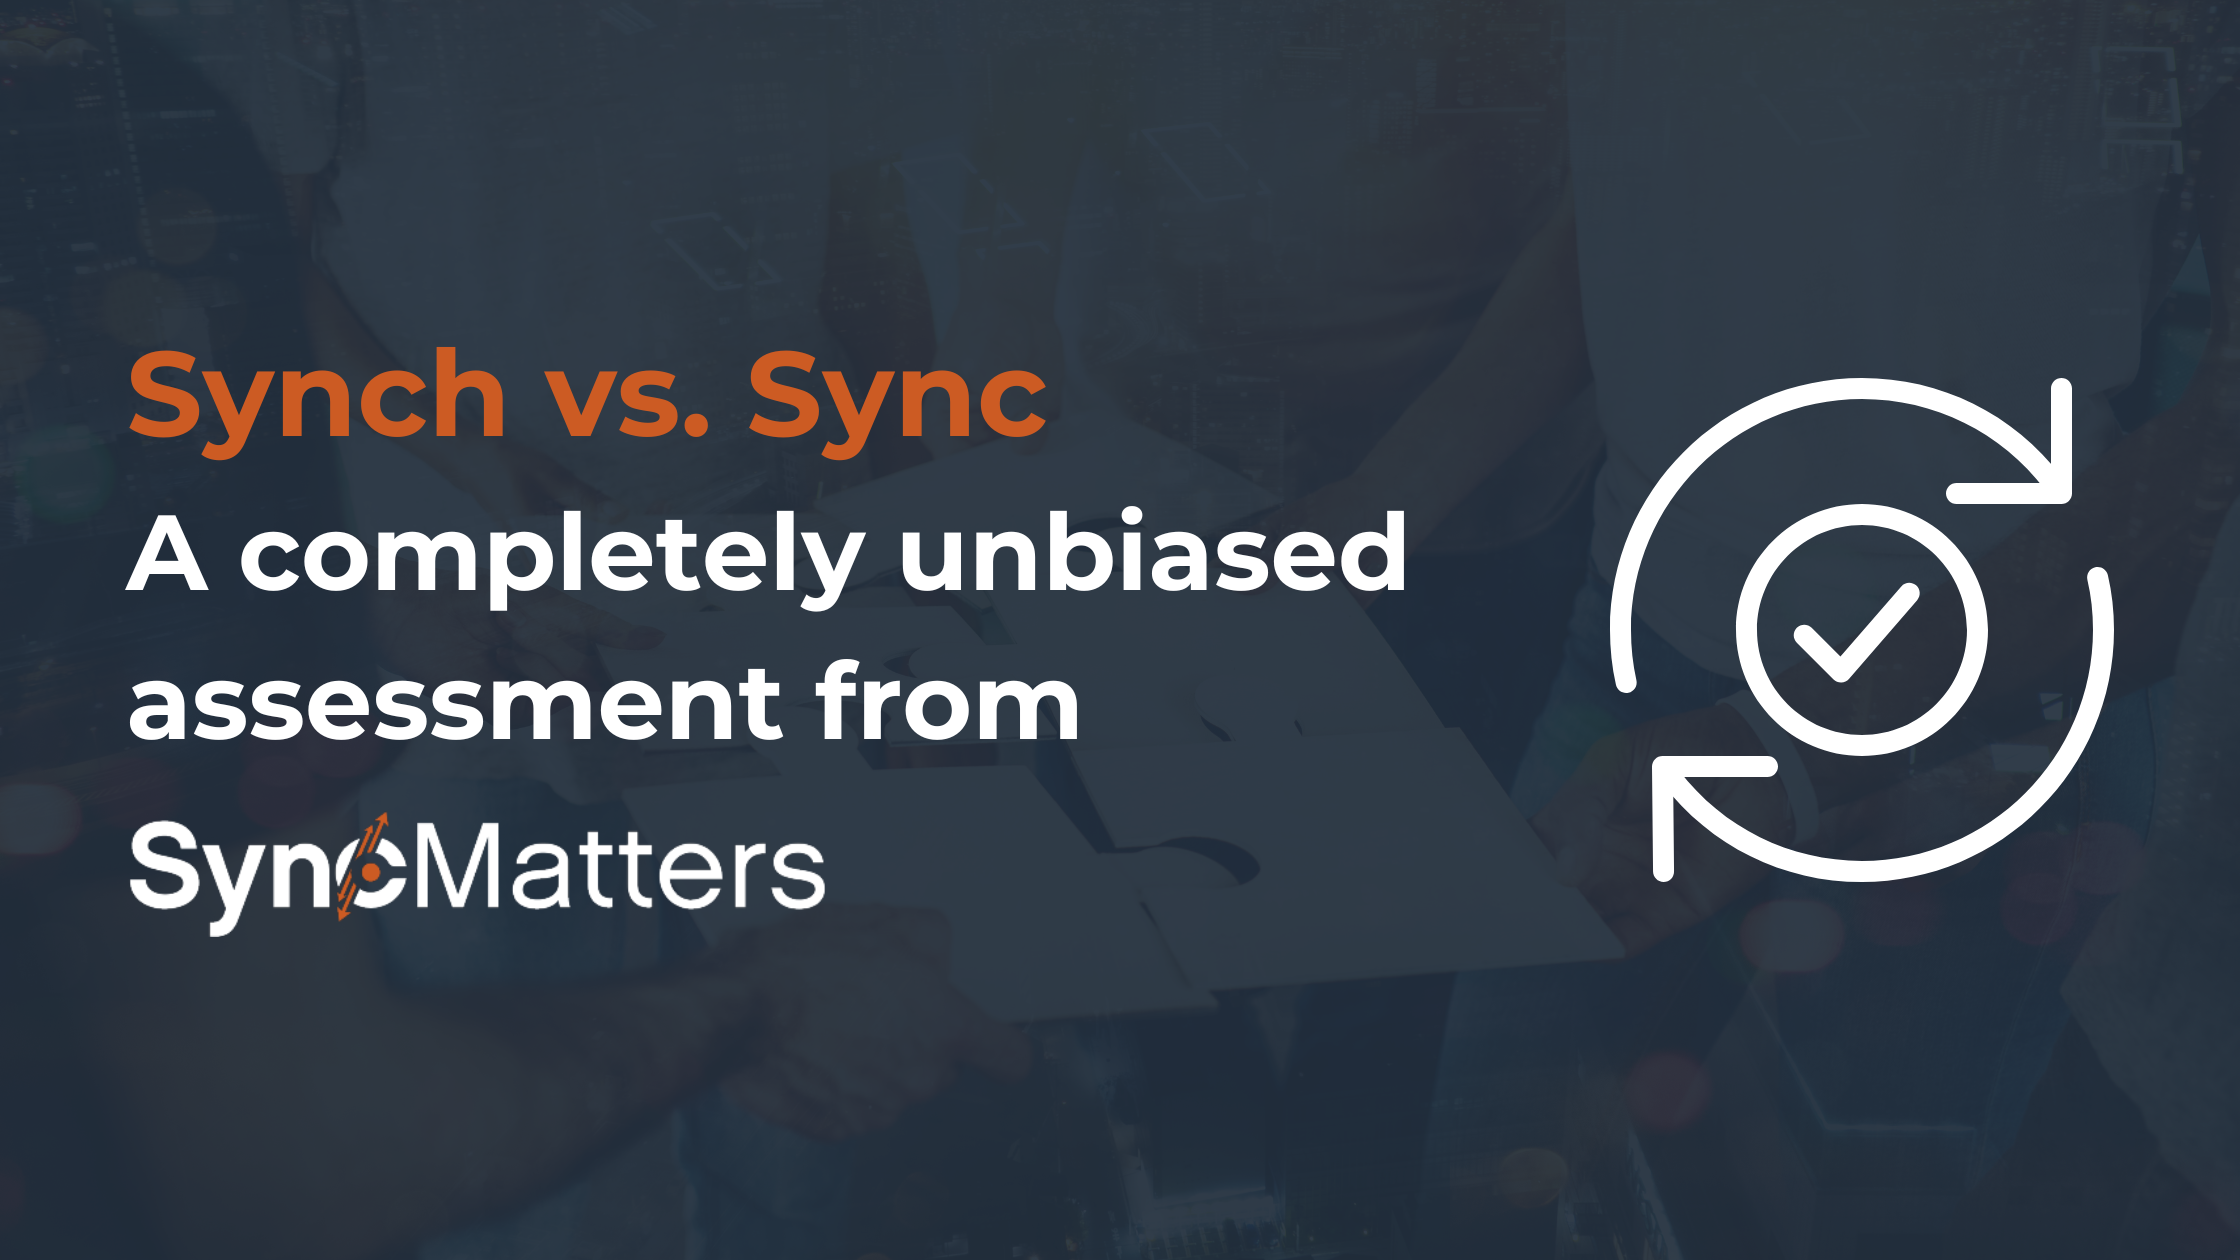 Decoding the Debate: Synch vs Sync - What's the Correct Usage?